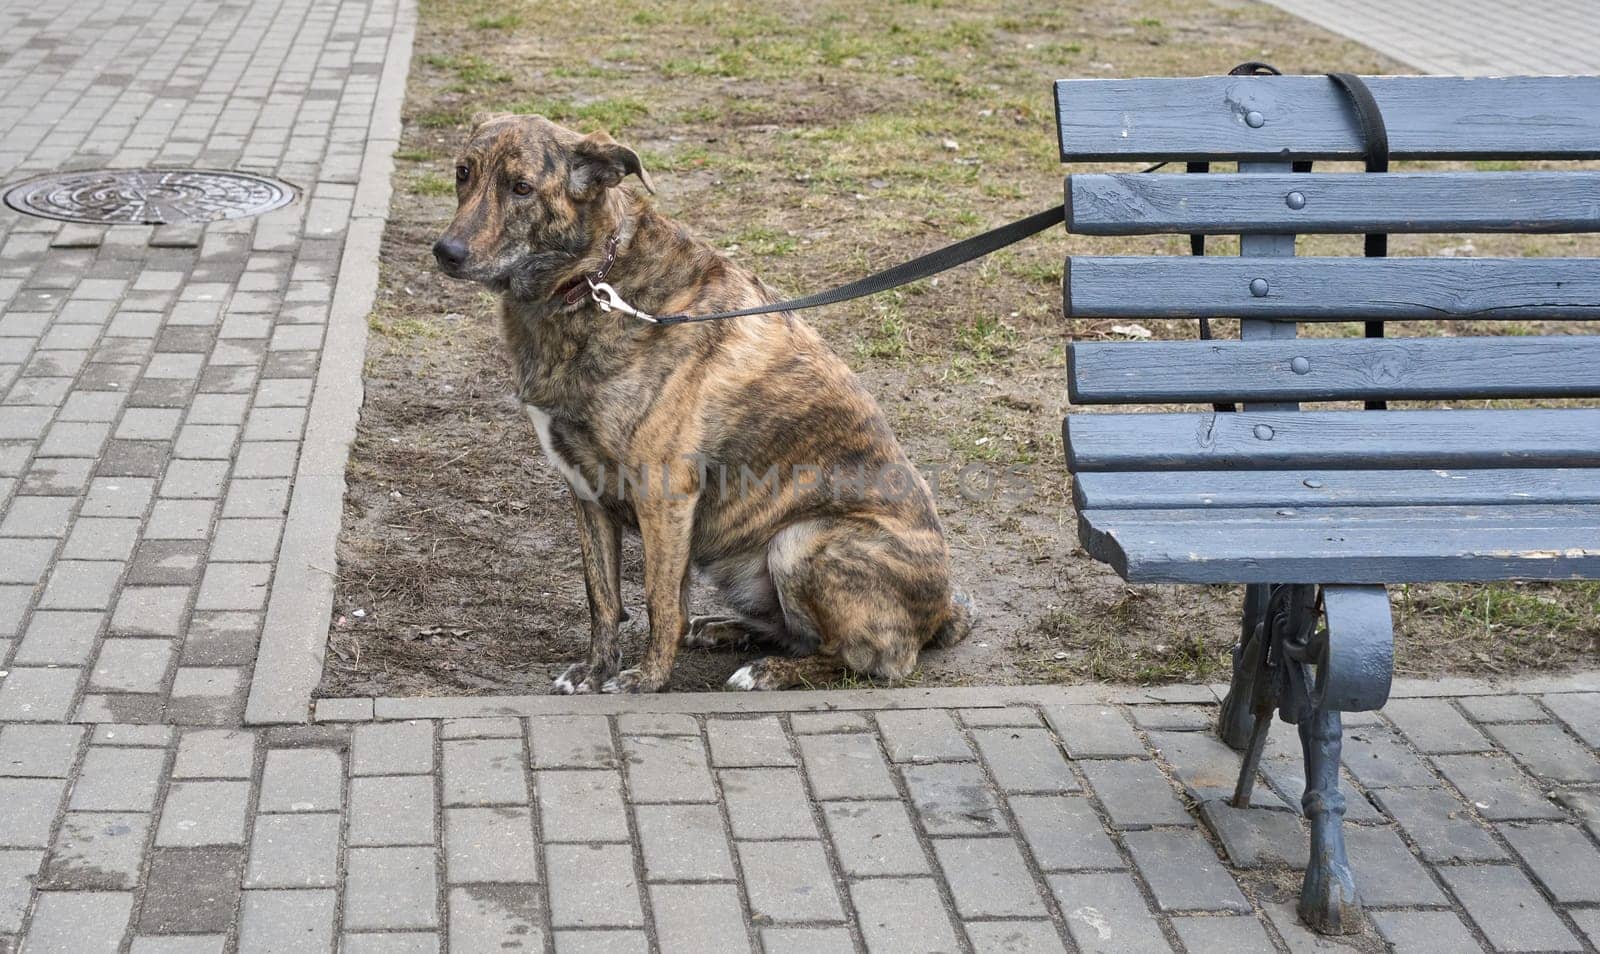 Dog tied to a bench waiting for its owner.